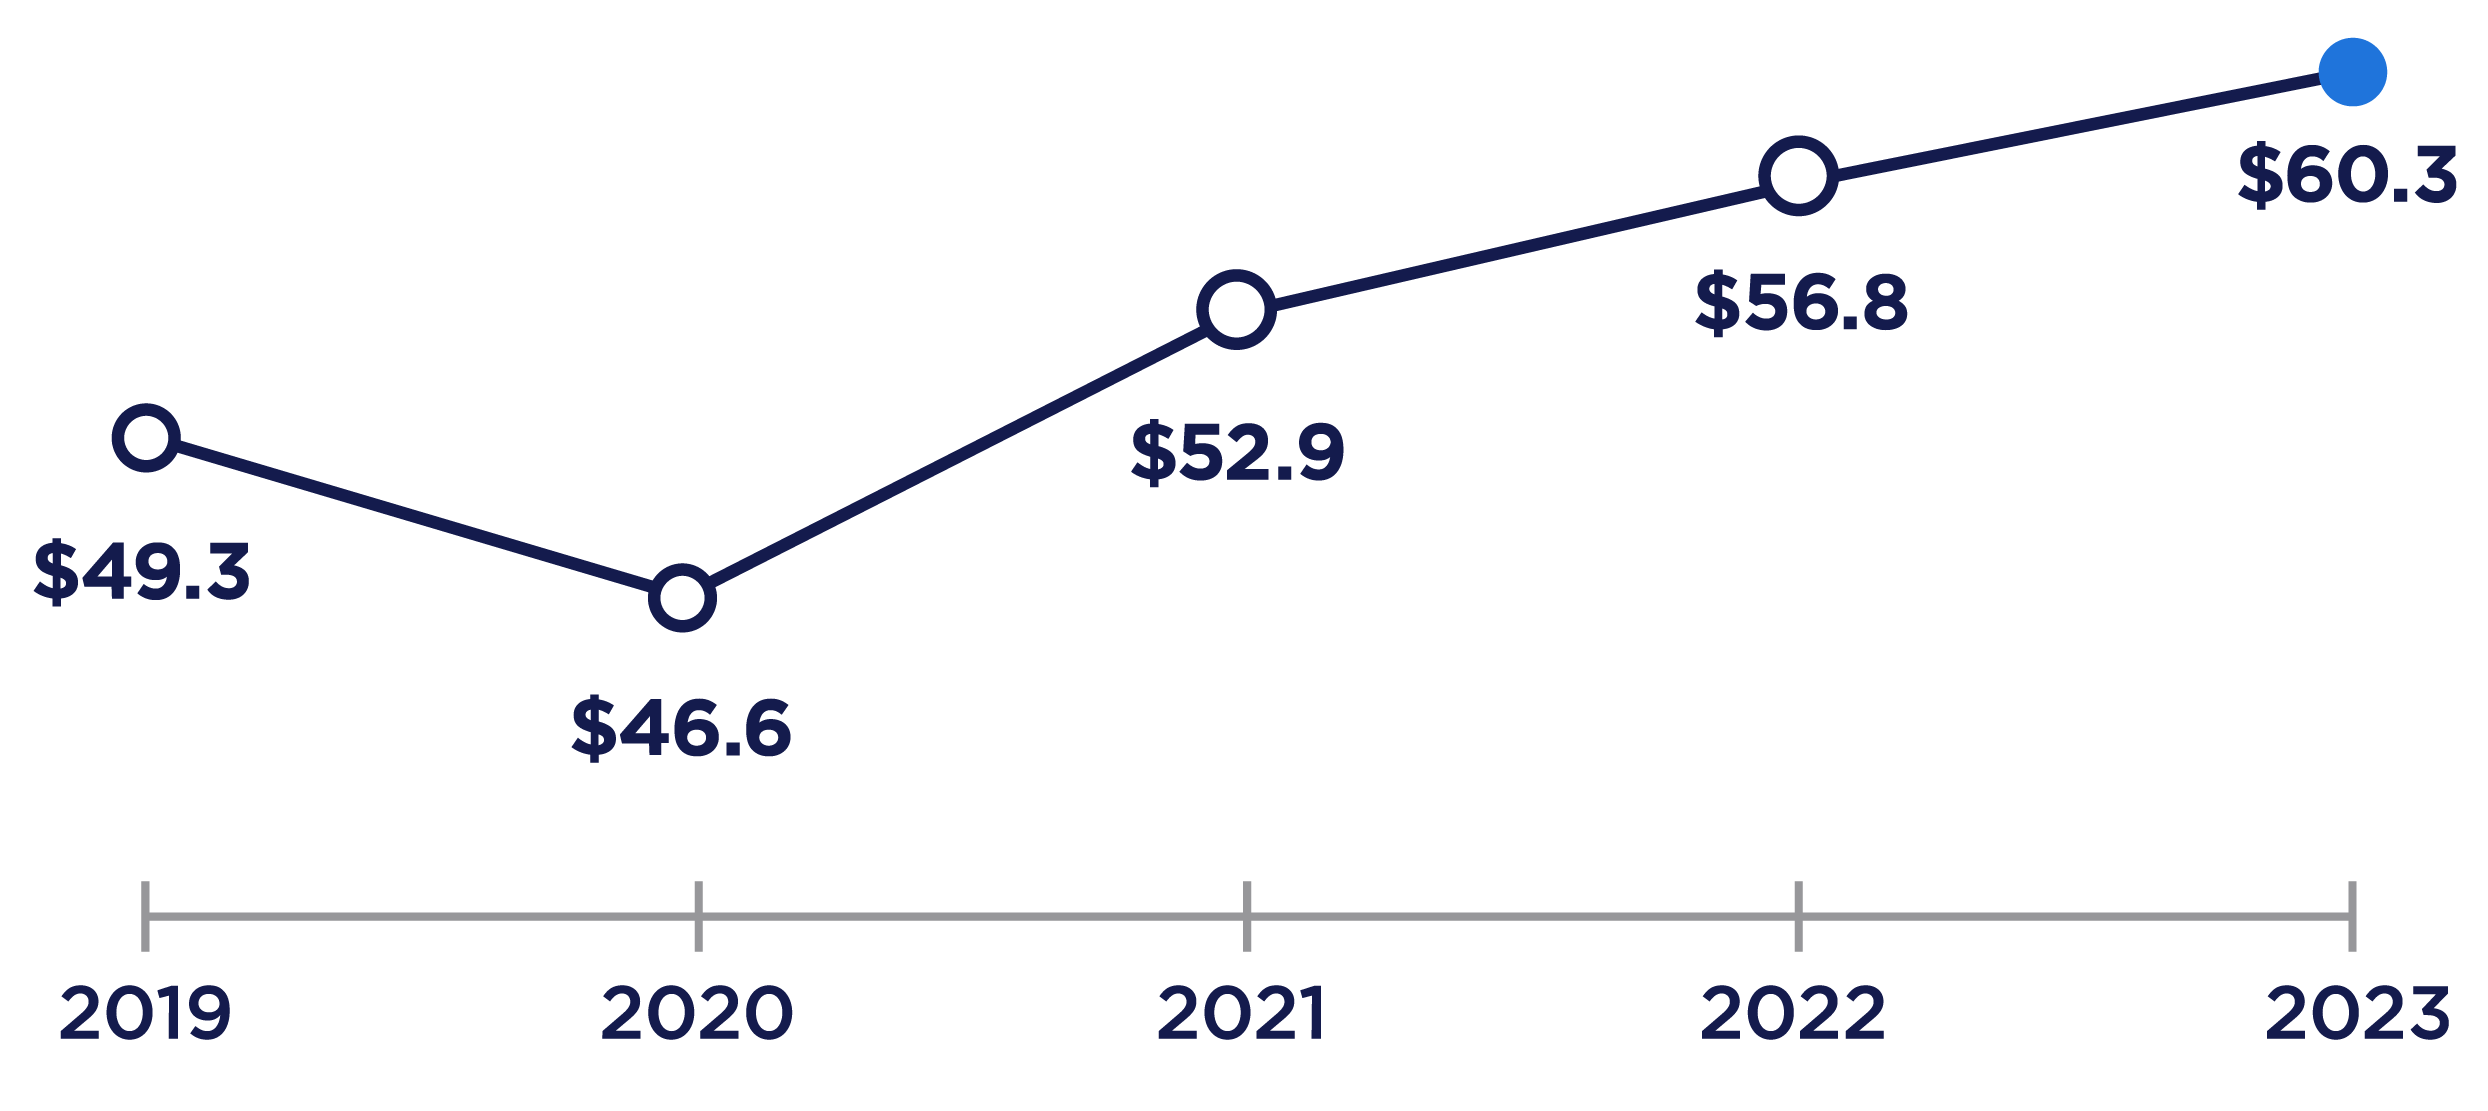 A graph tracking total sales from 2019 through 2023 shows that total sales in 2019 were $49.3 billion, total sales in 2020 were $46.6 billion, total sales in 2021 were $52.9 billion, total sales in 2022 were $56.8 billion and total sales in in 2023 were $60.3 billion.